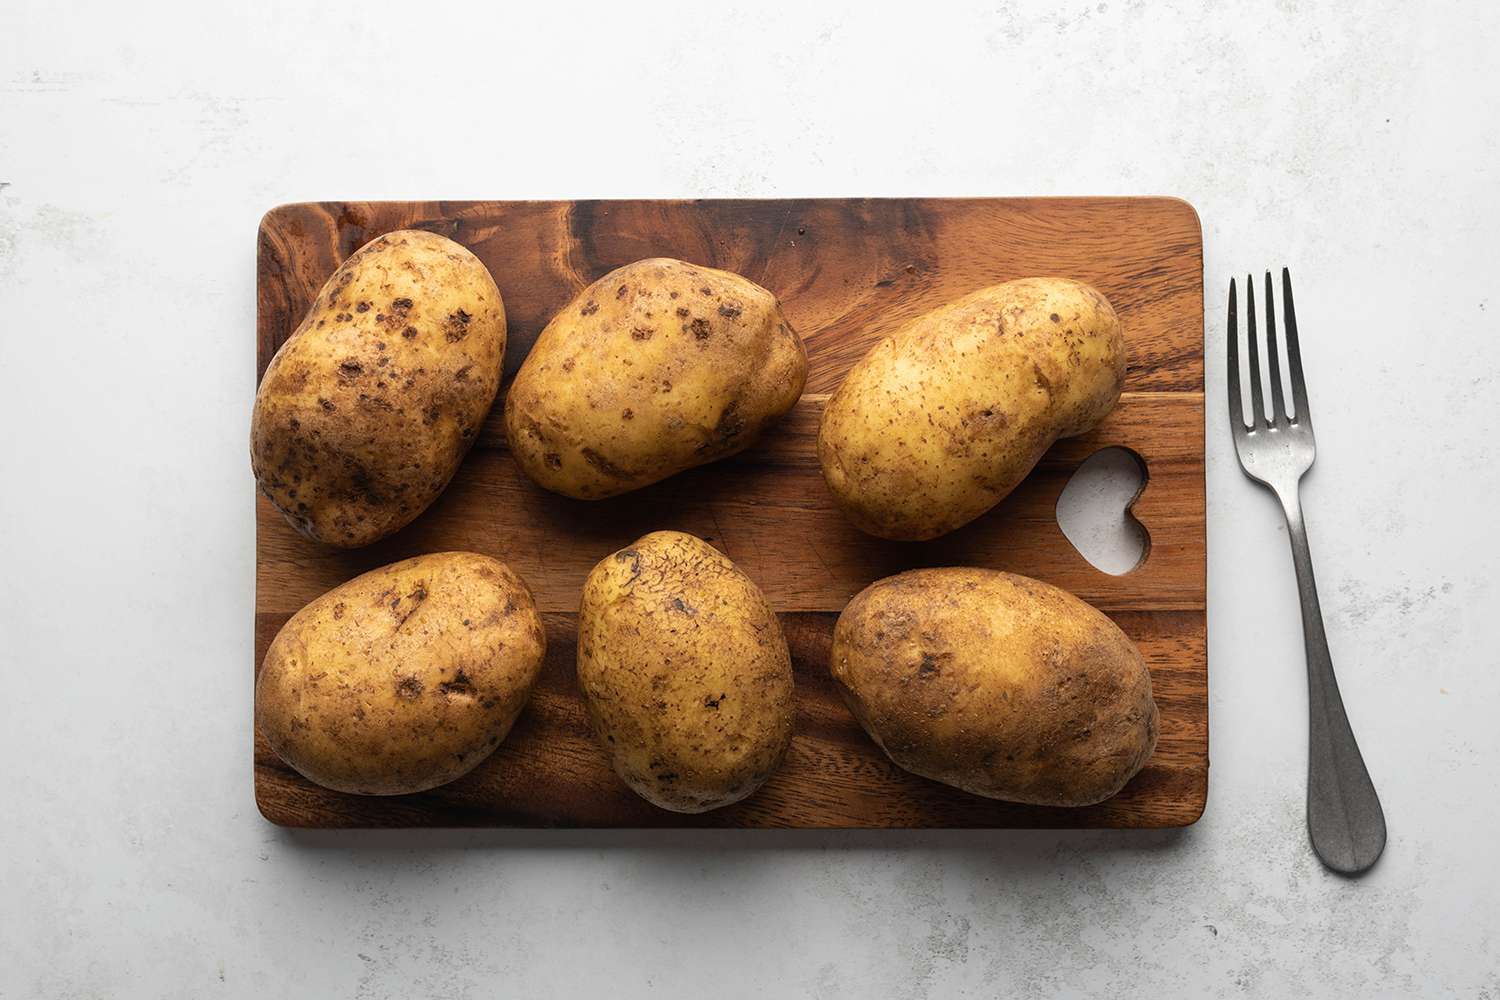 Potatoes on a wooden cutting board, next to a fork 